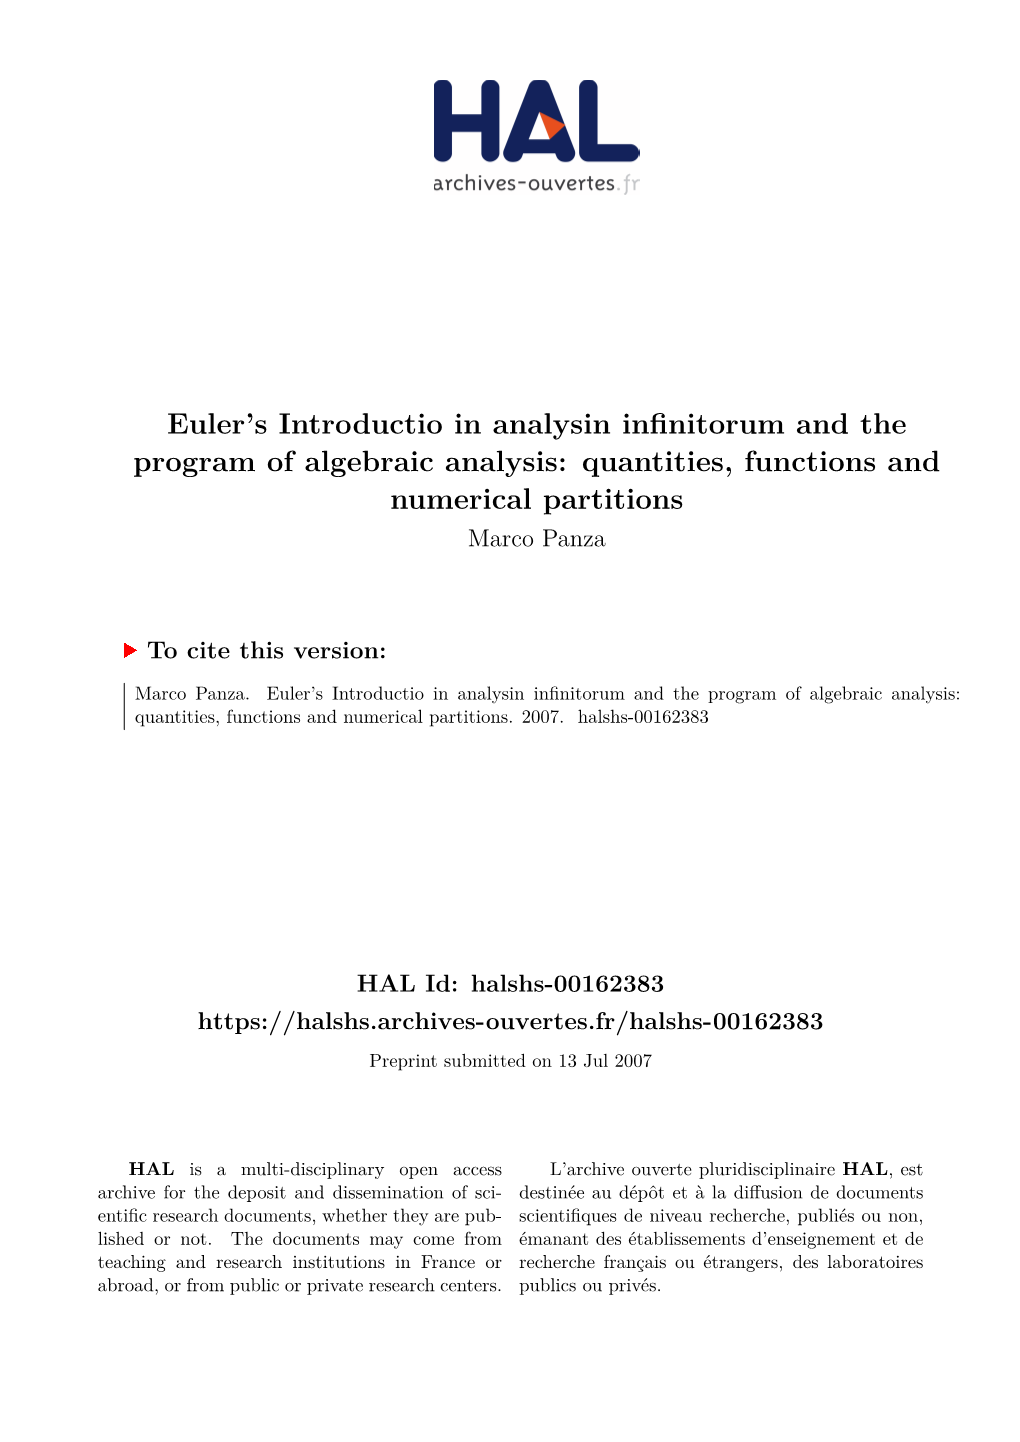 Euler's Introductio in Analysin Infinitorum and The